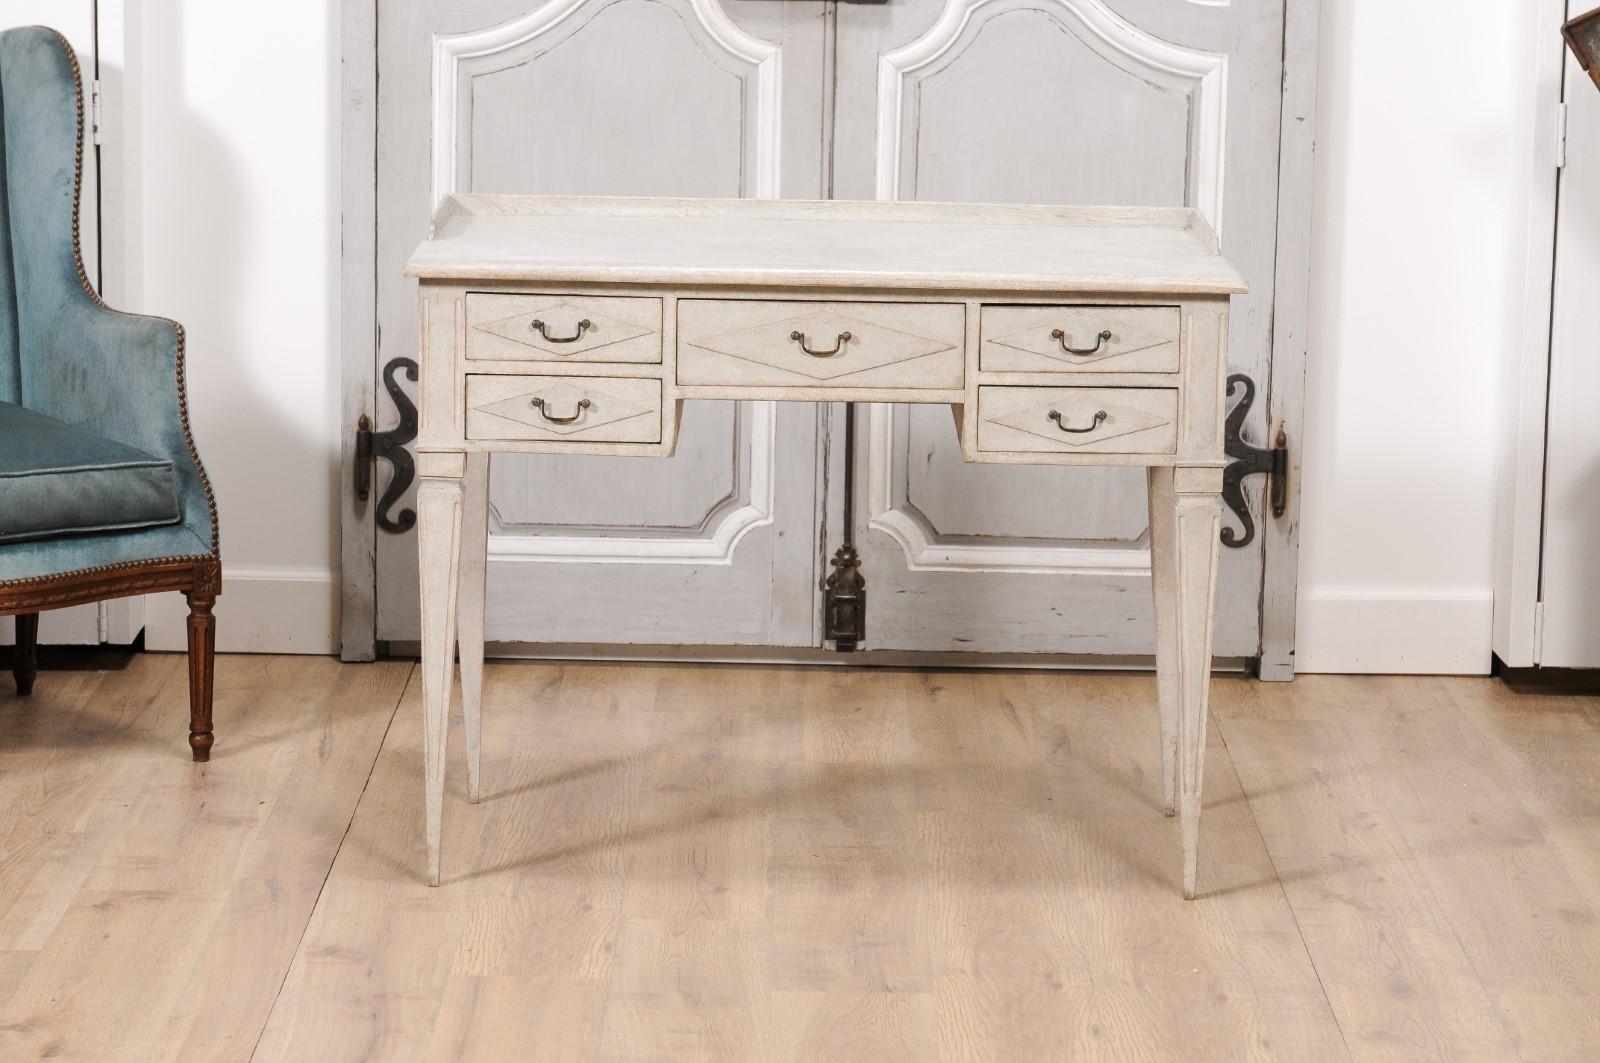 1880s Swedish Gustavian Style Painted Desk with Five Drawers and Tapered Legs For Sale 6